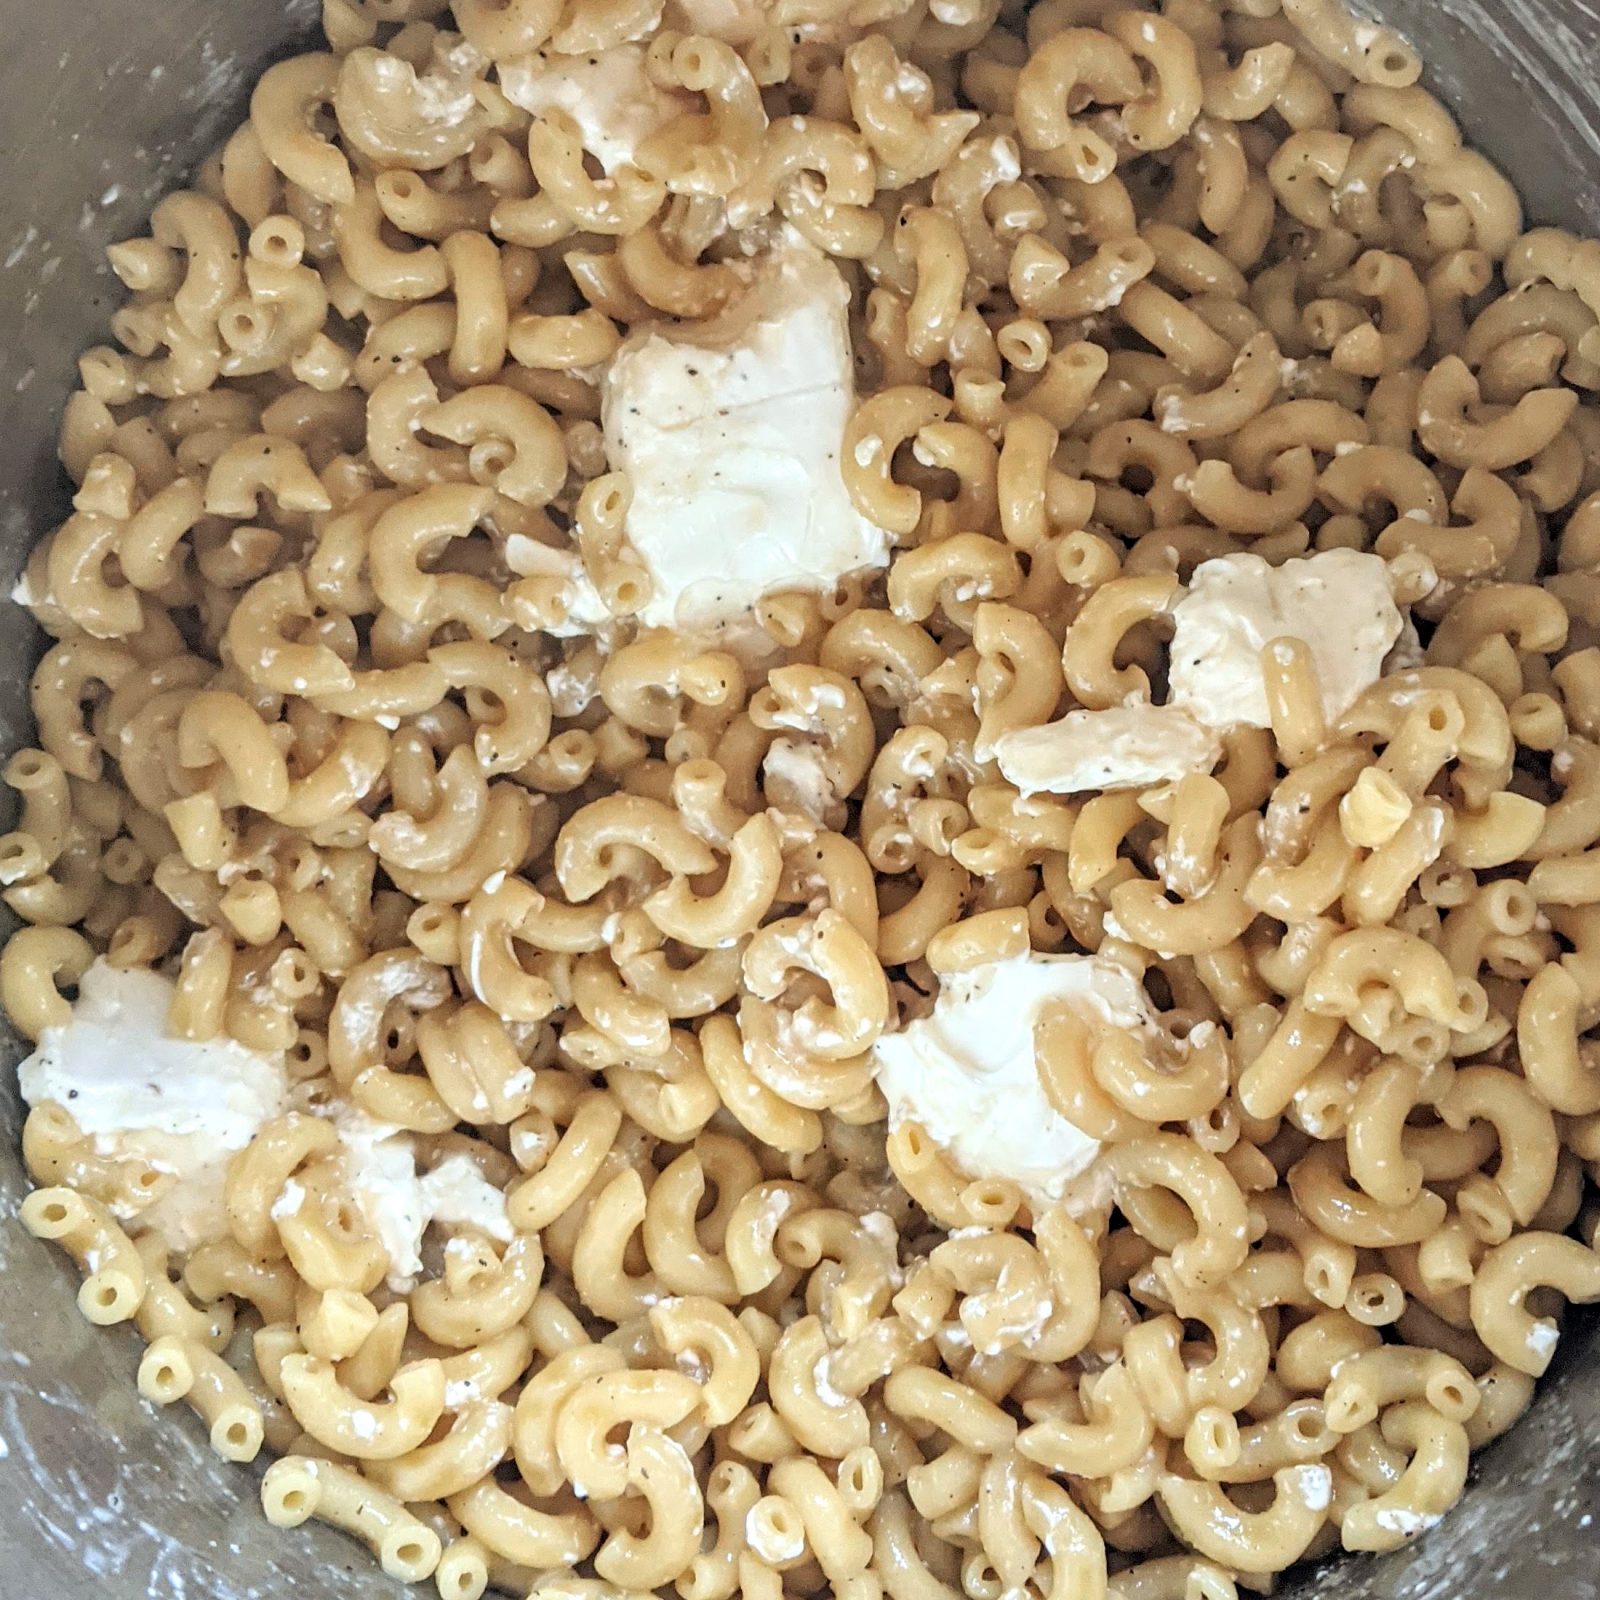 cubed cream cheese in cooked macaroni